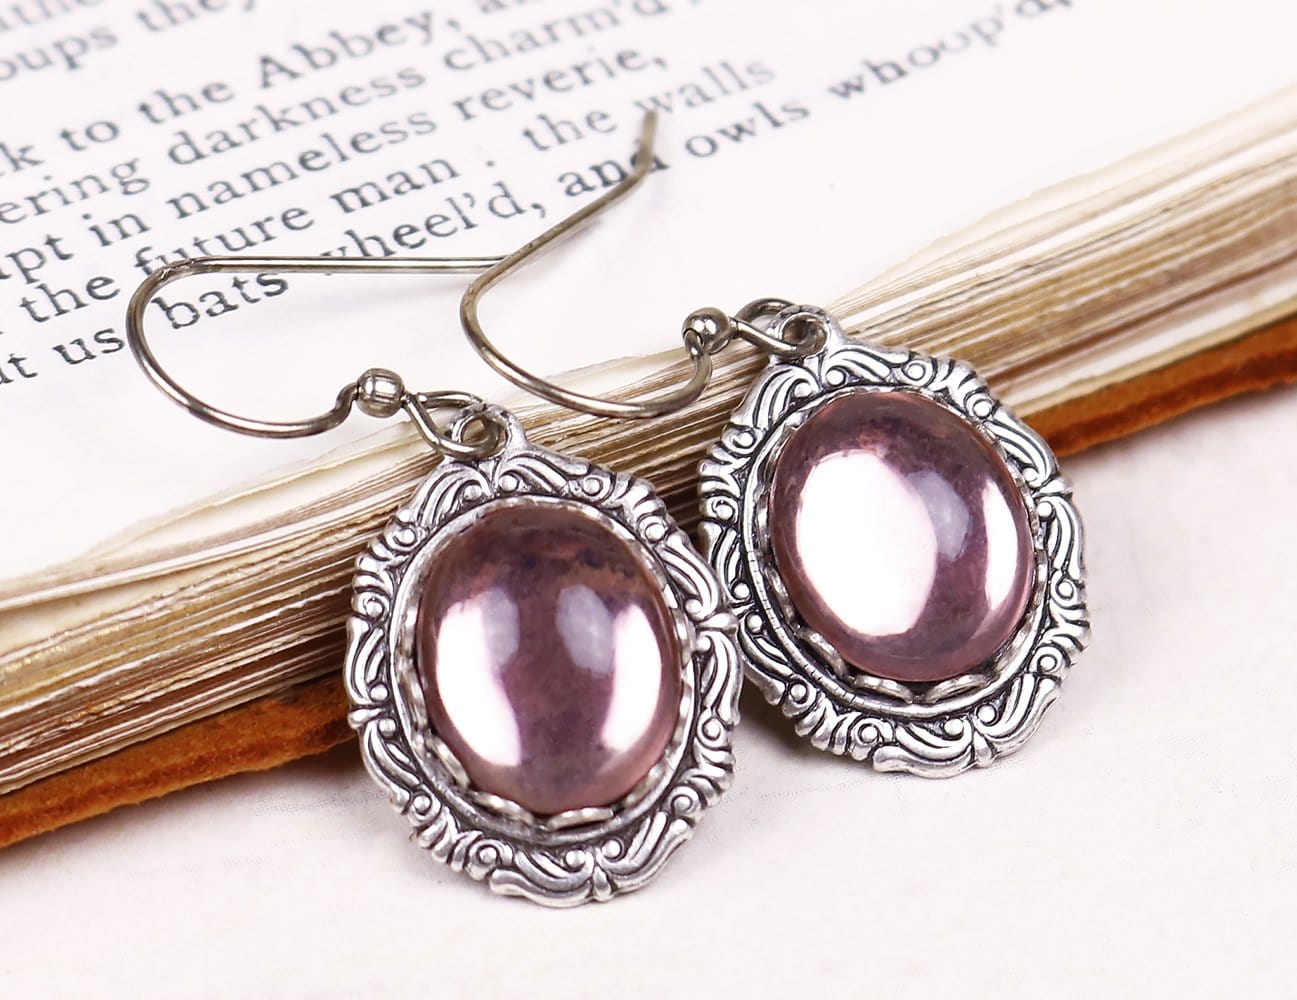 Perceval Earrings in Pale Lavender - Antiqued Silver by dosha of Rabbitwood & Reason